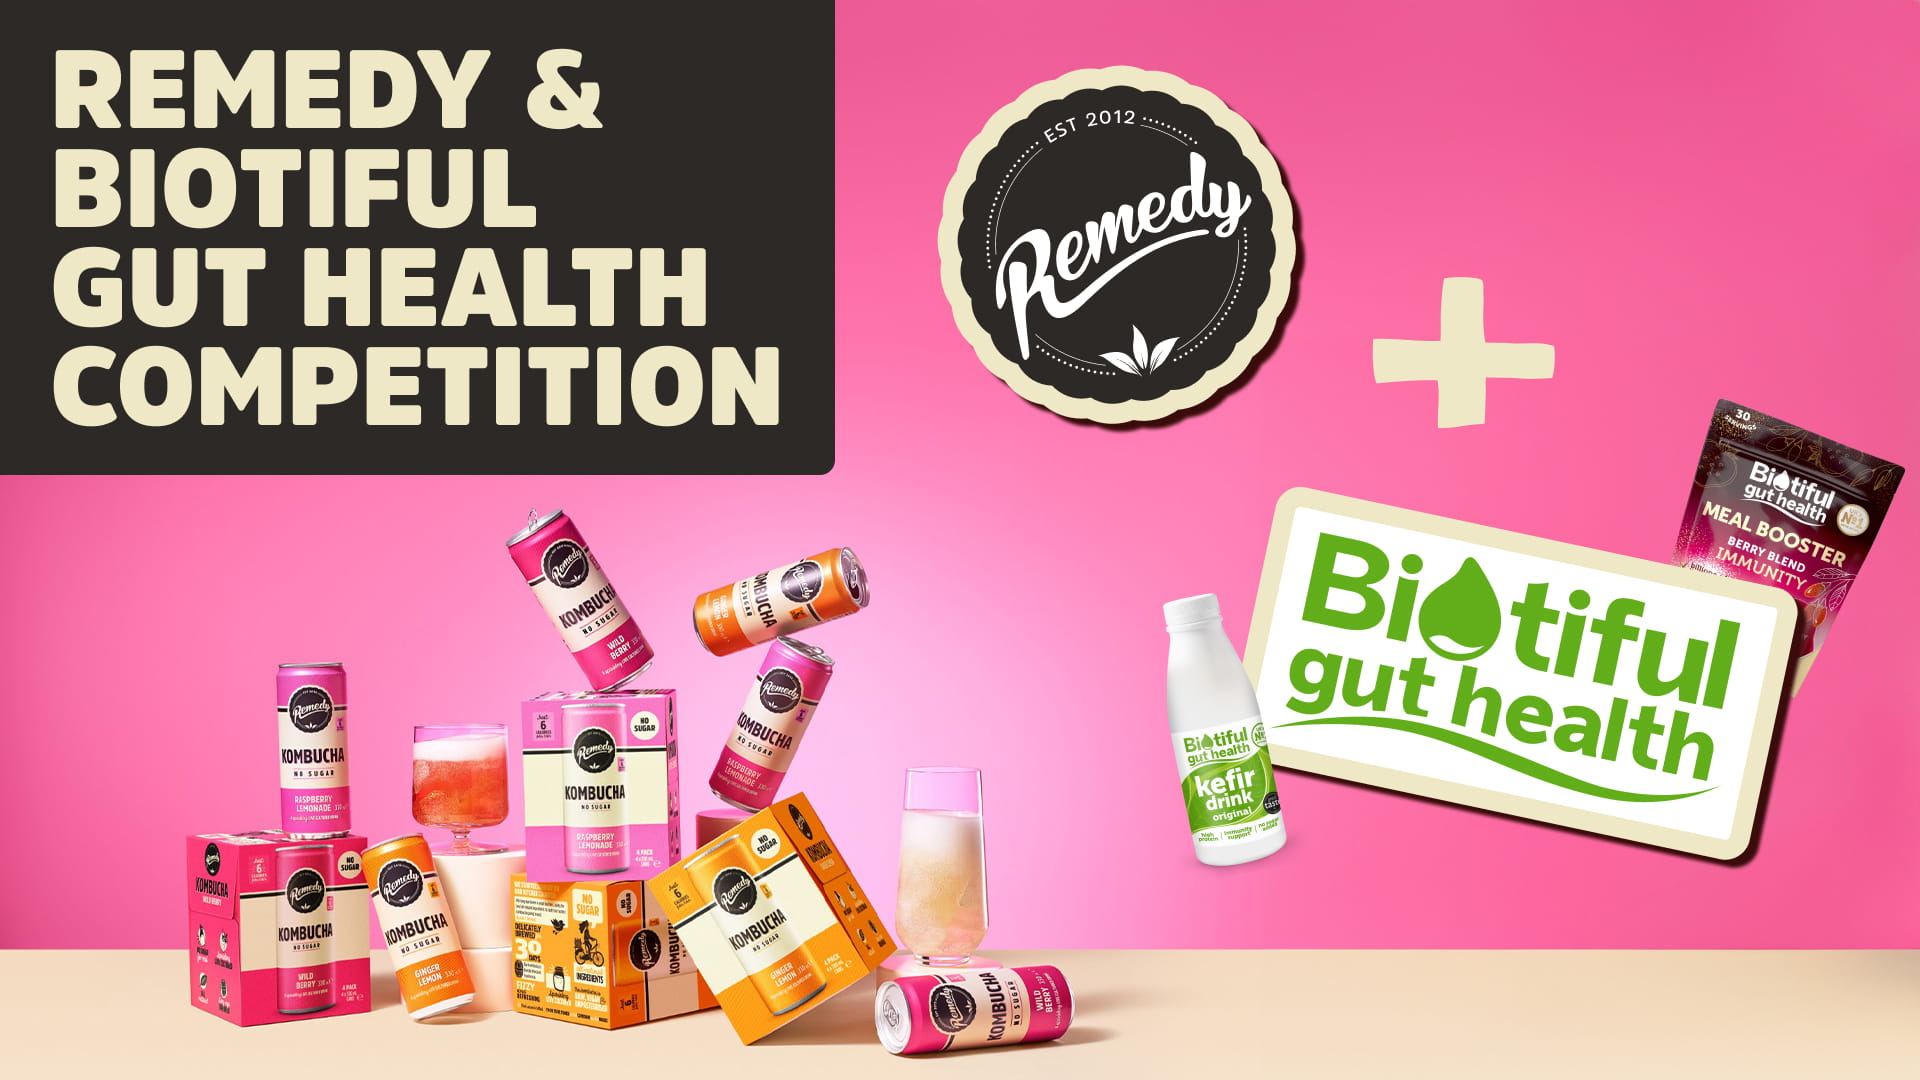 Remedy & Biotiful Gut Health Competition